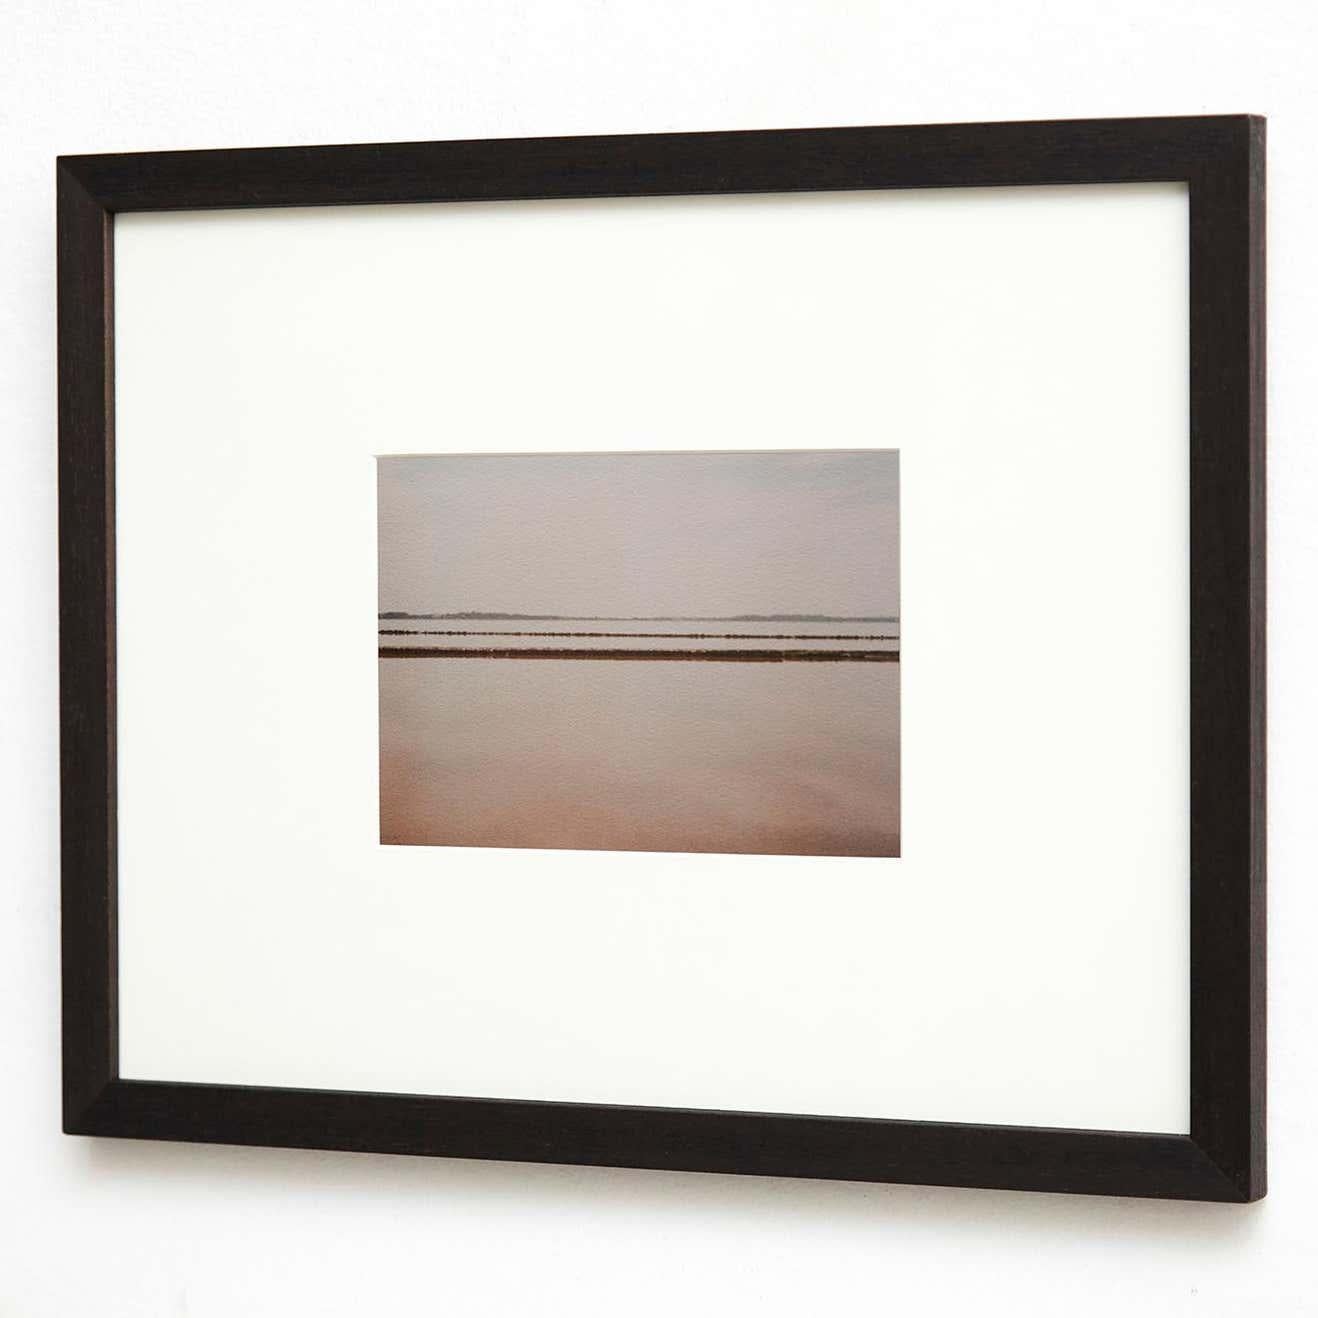 Paper David Urbano Contemporary Land Photography, Rewind/Forward N05 For Sale